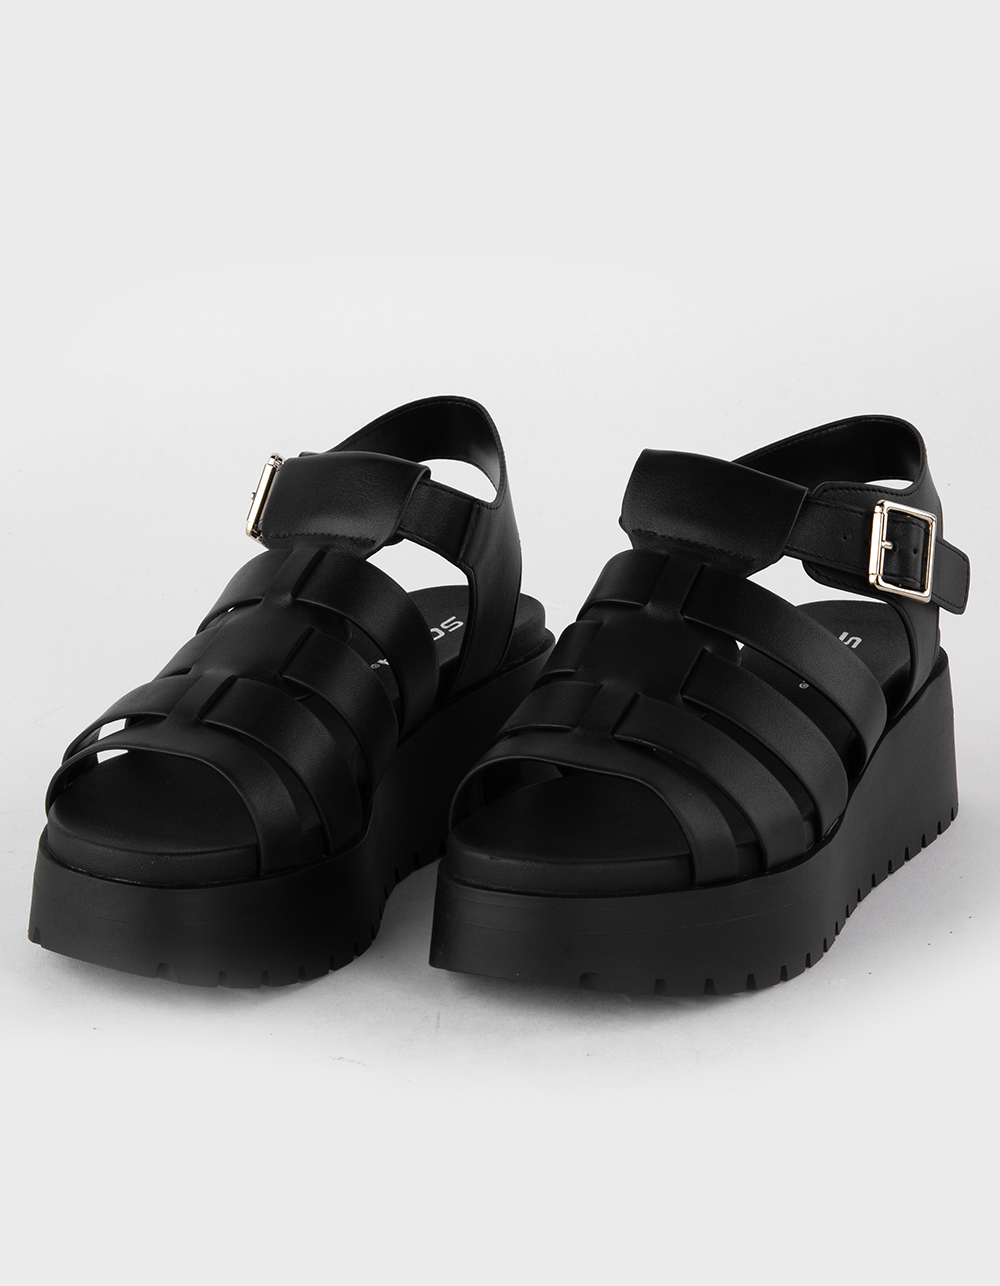 SODA Shoes, Sandals, & Boots | Tillys